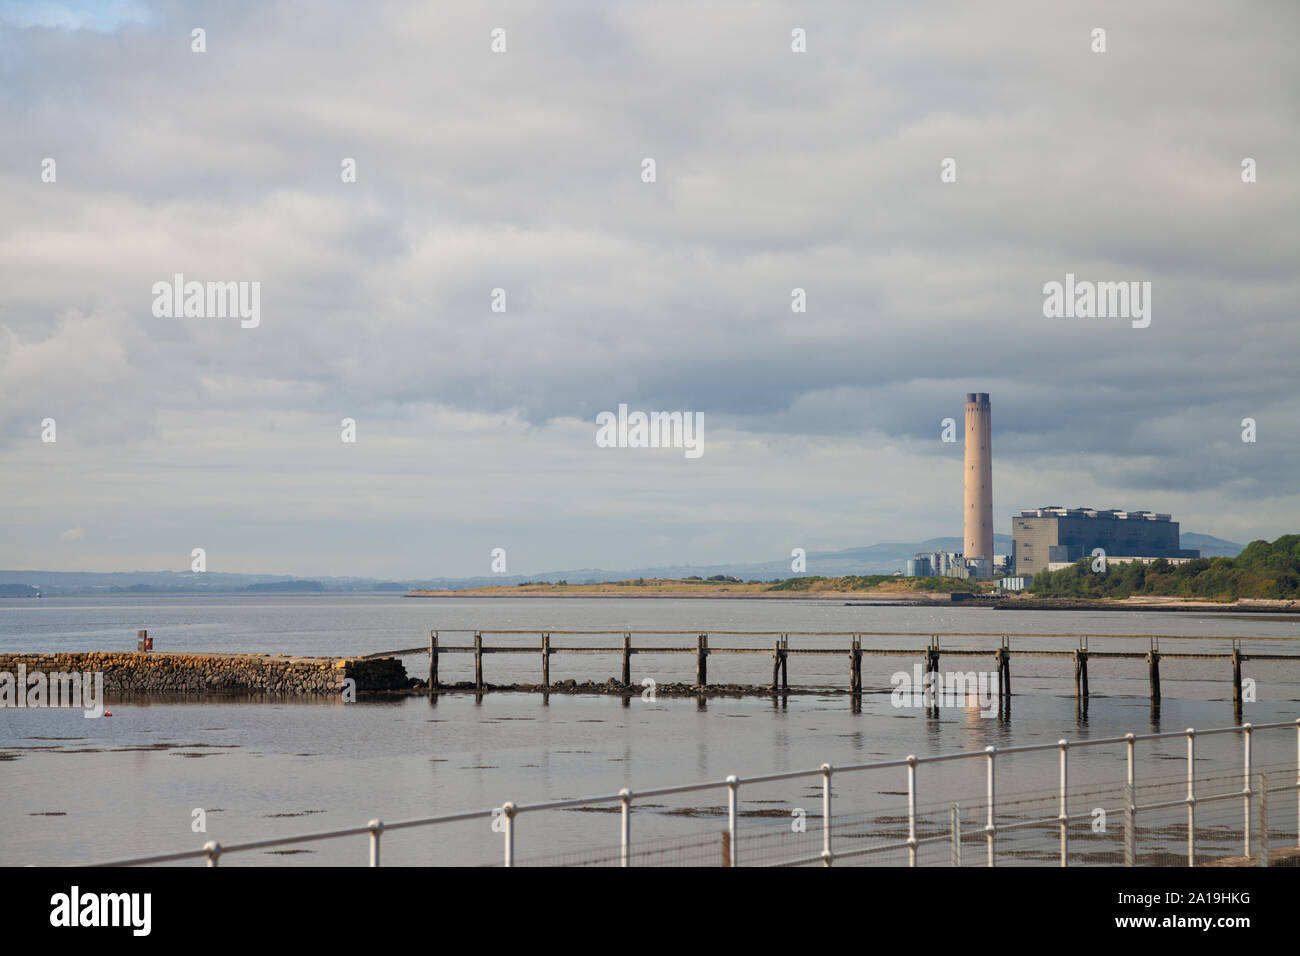 Longannet Power Station with the River Forth seen from Culross, Fife, Scotland. Stock Photo